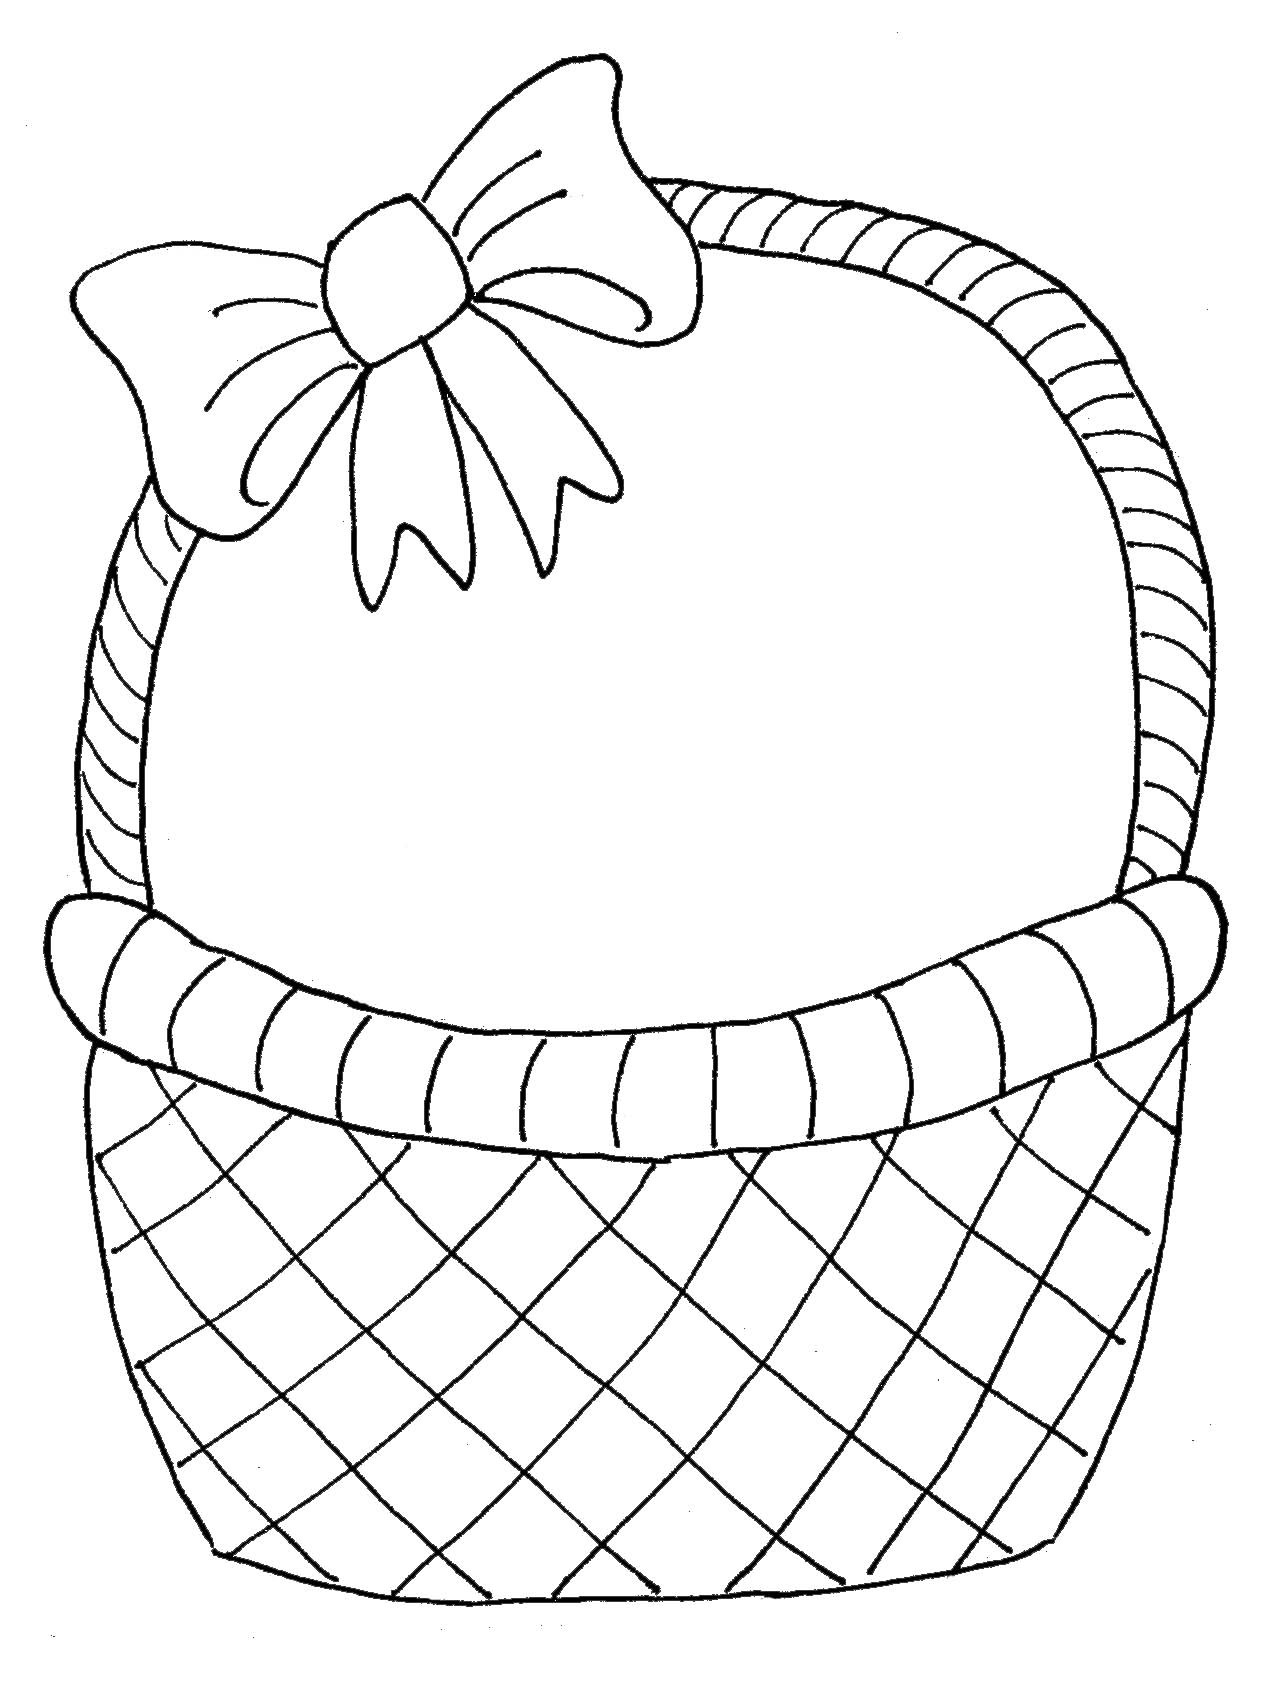 Download Fruit Basket Drawing Easy at PaintingValley.com | Explore ...